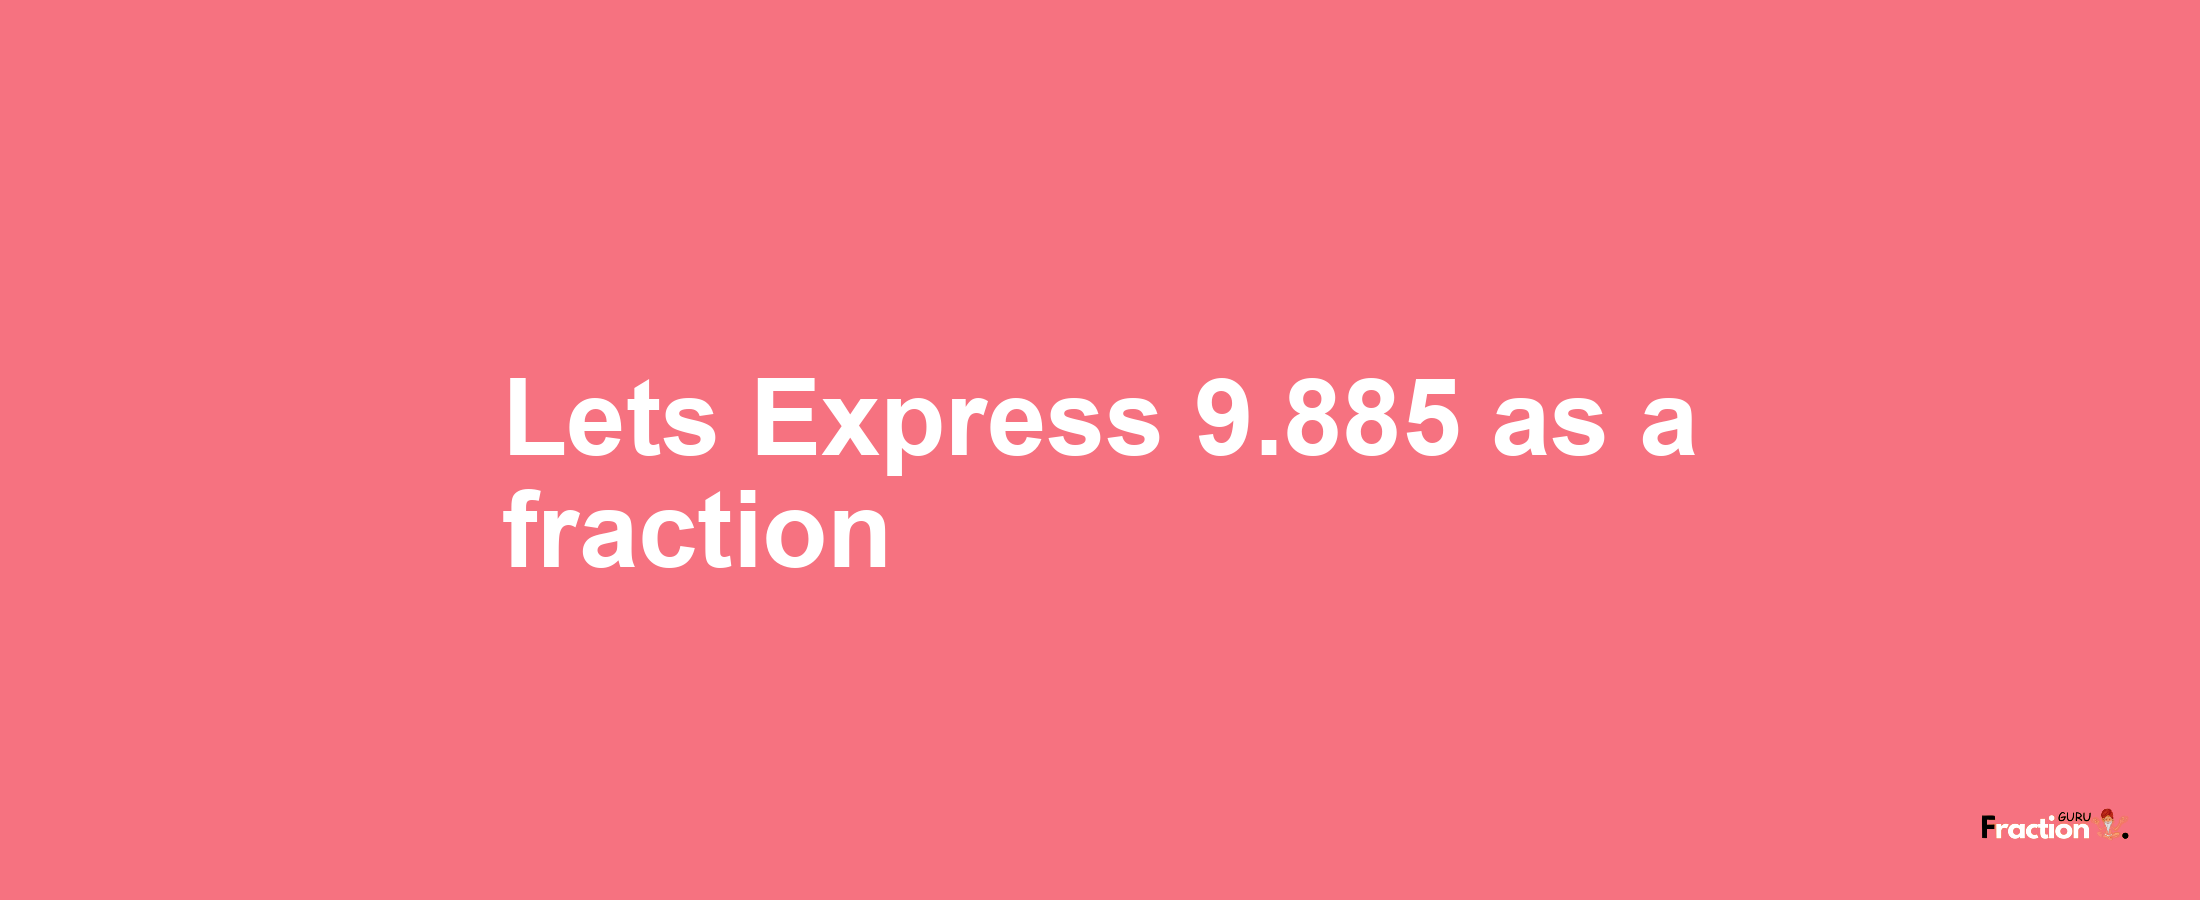 Lets Express 9.885 as afraction